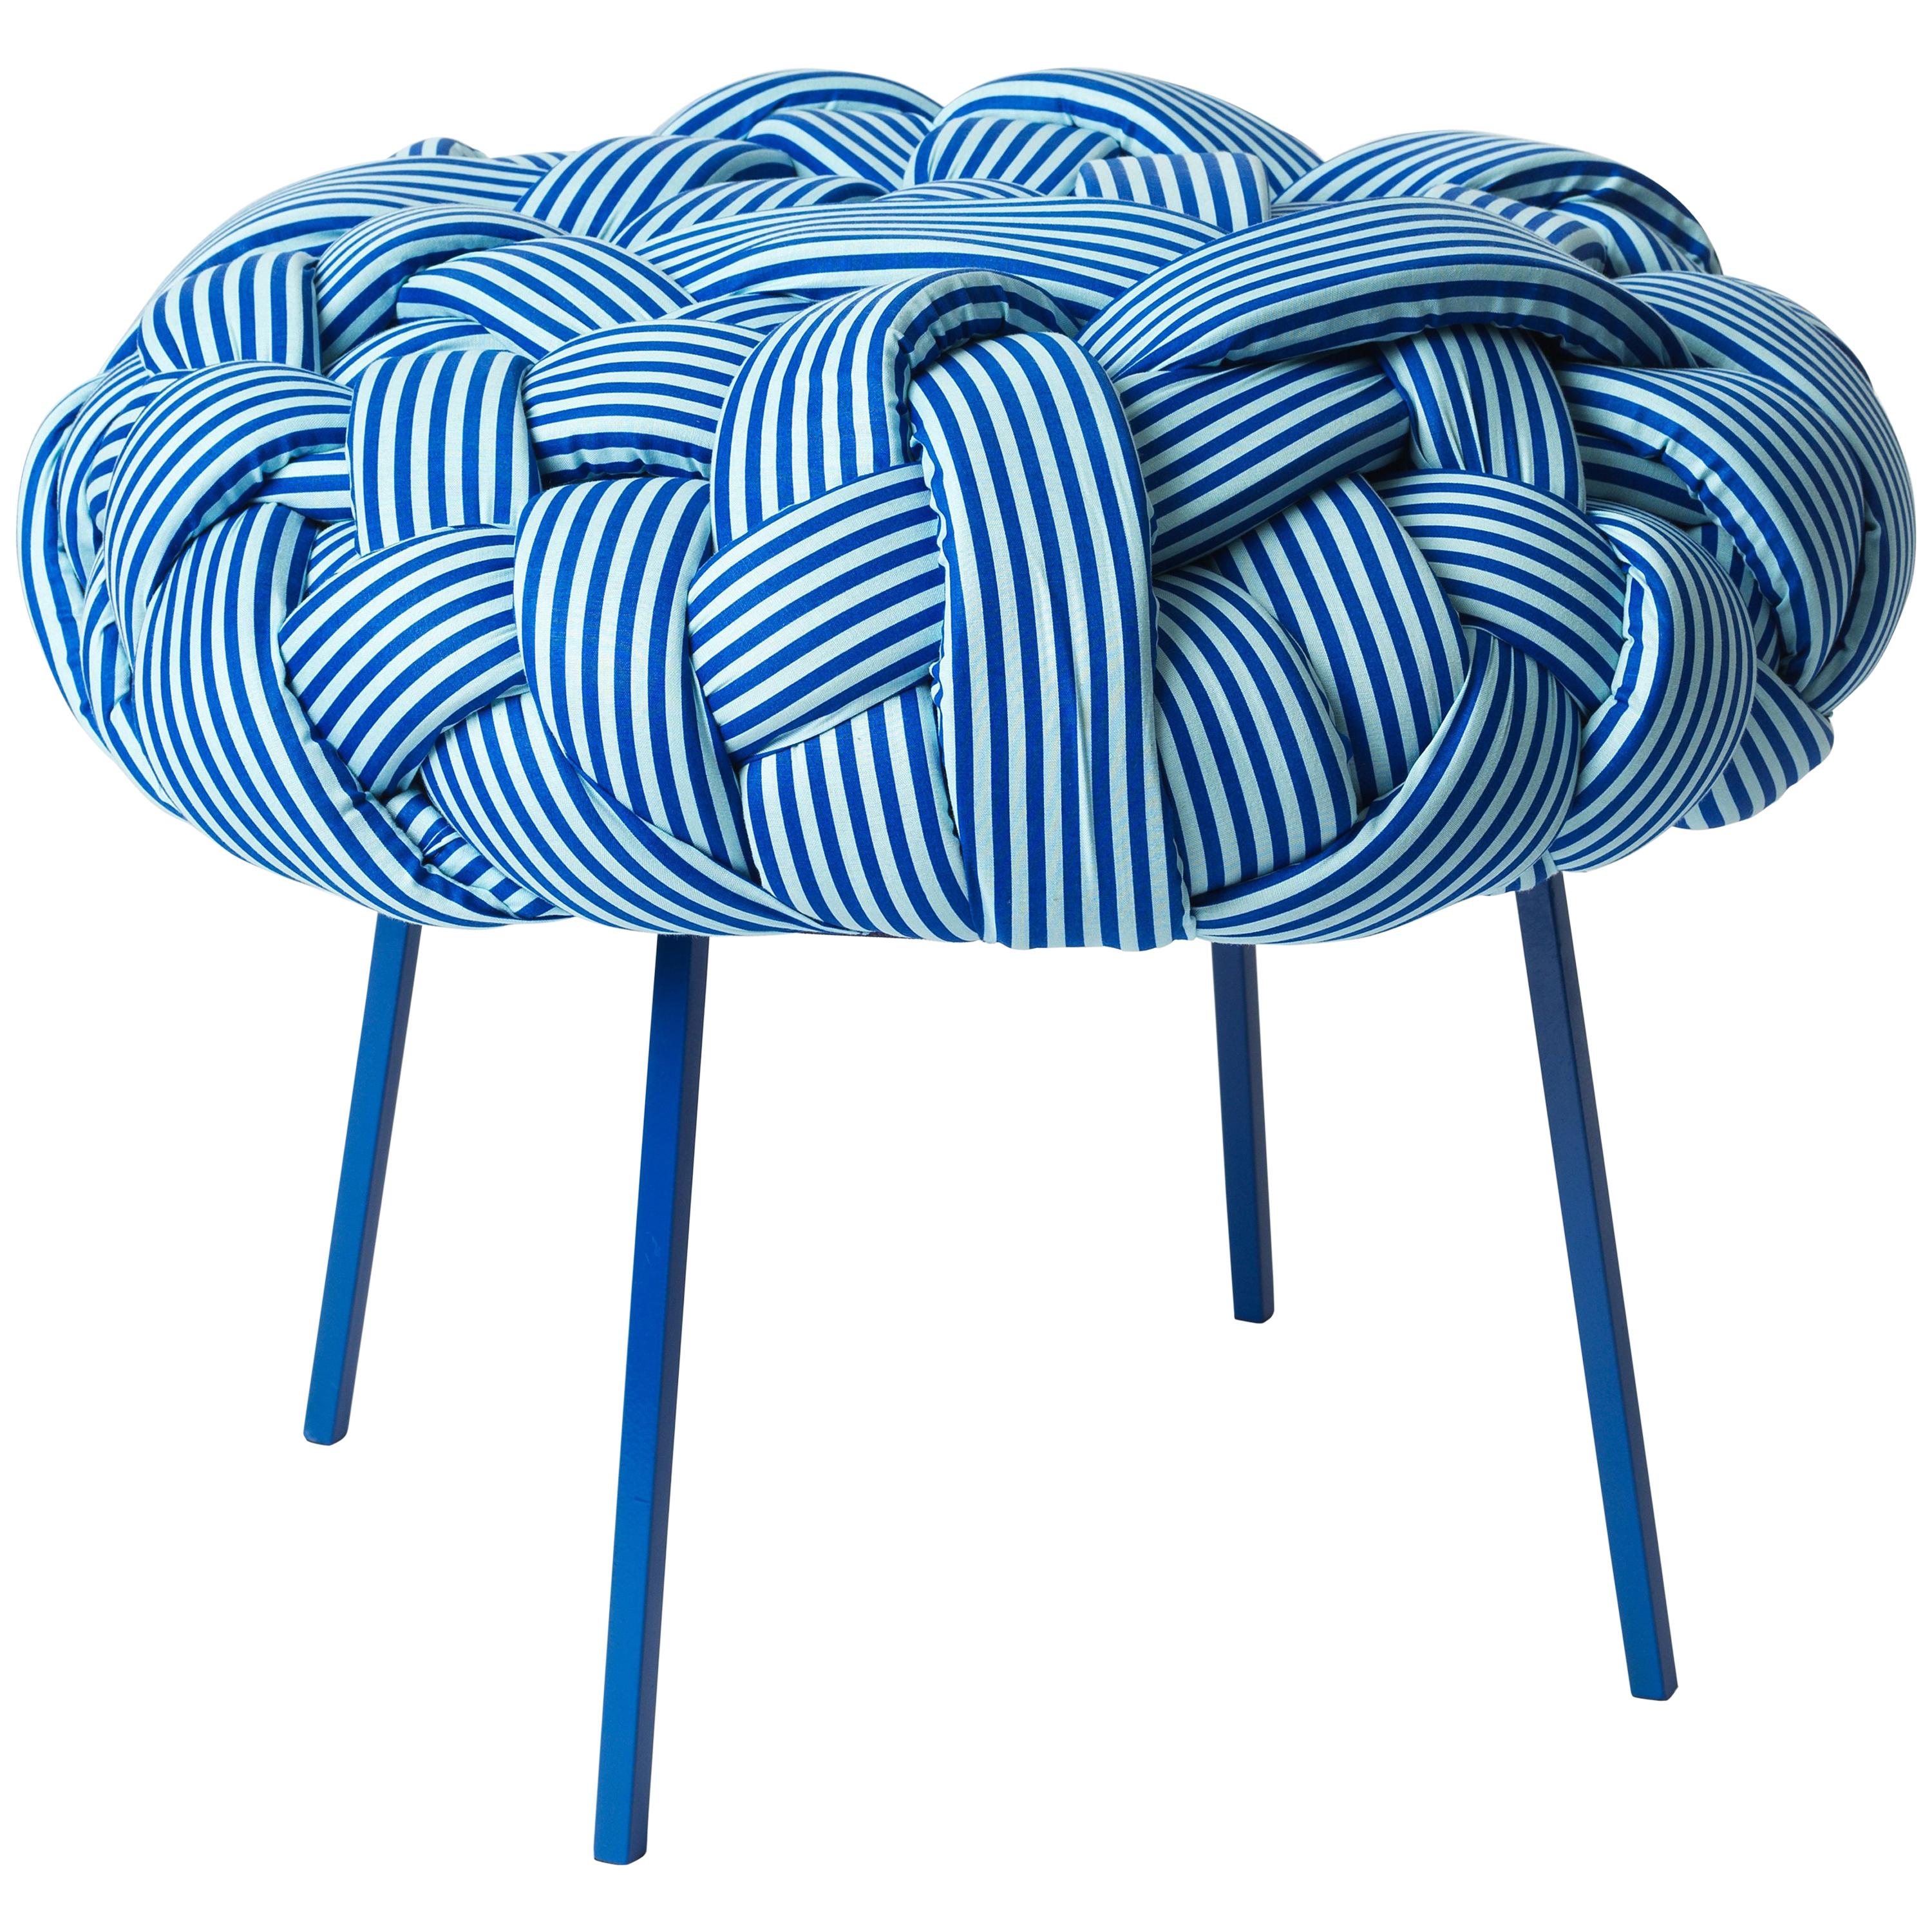 "Cloud" Contemporary Stool with Handwoven Blue Upholstery